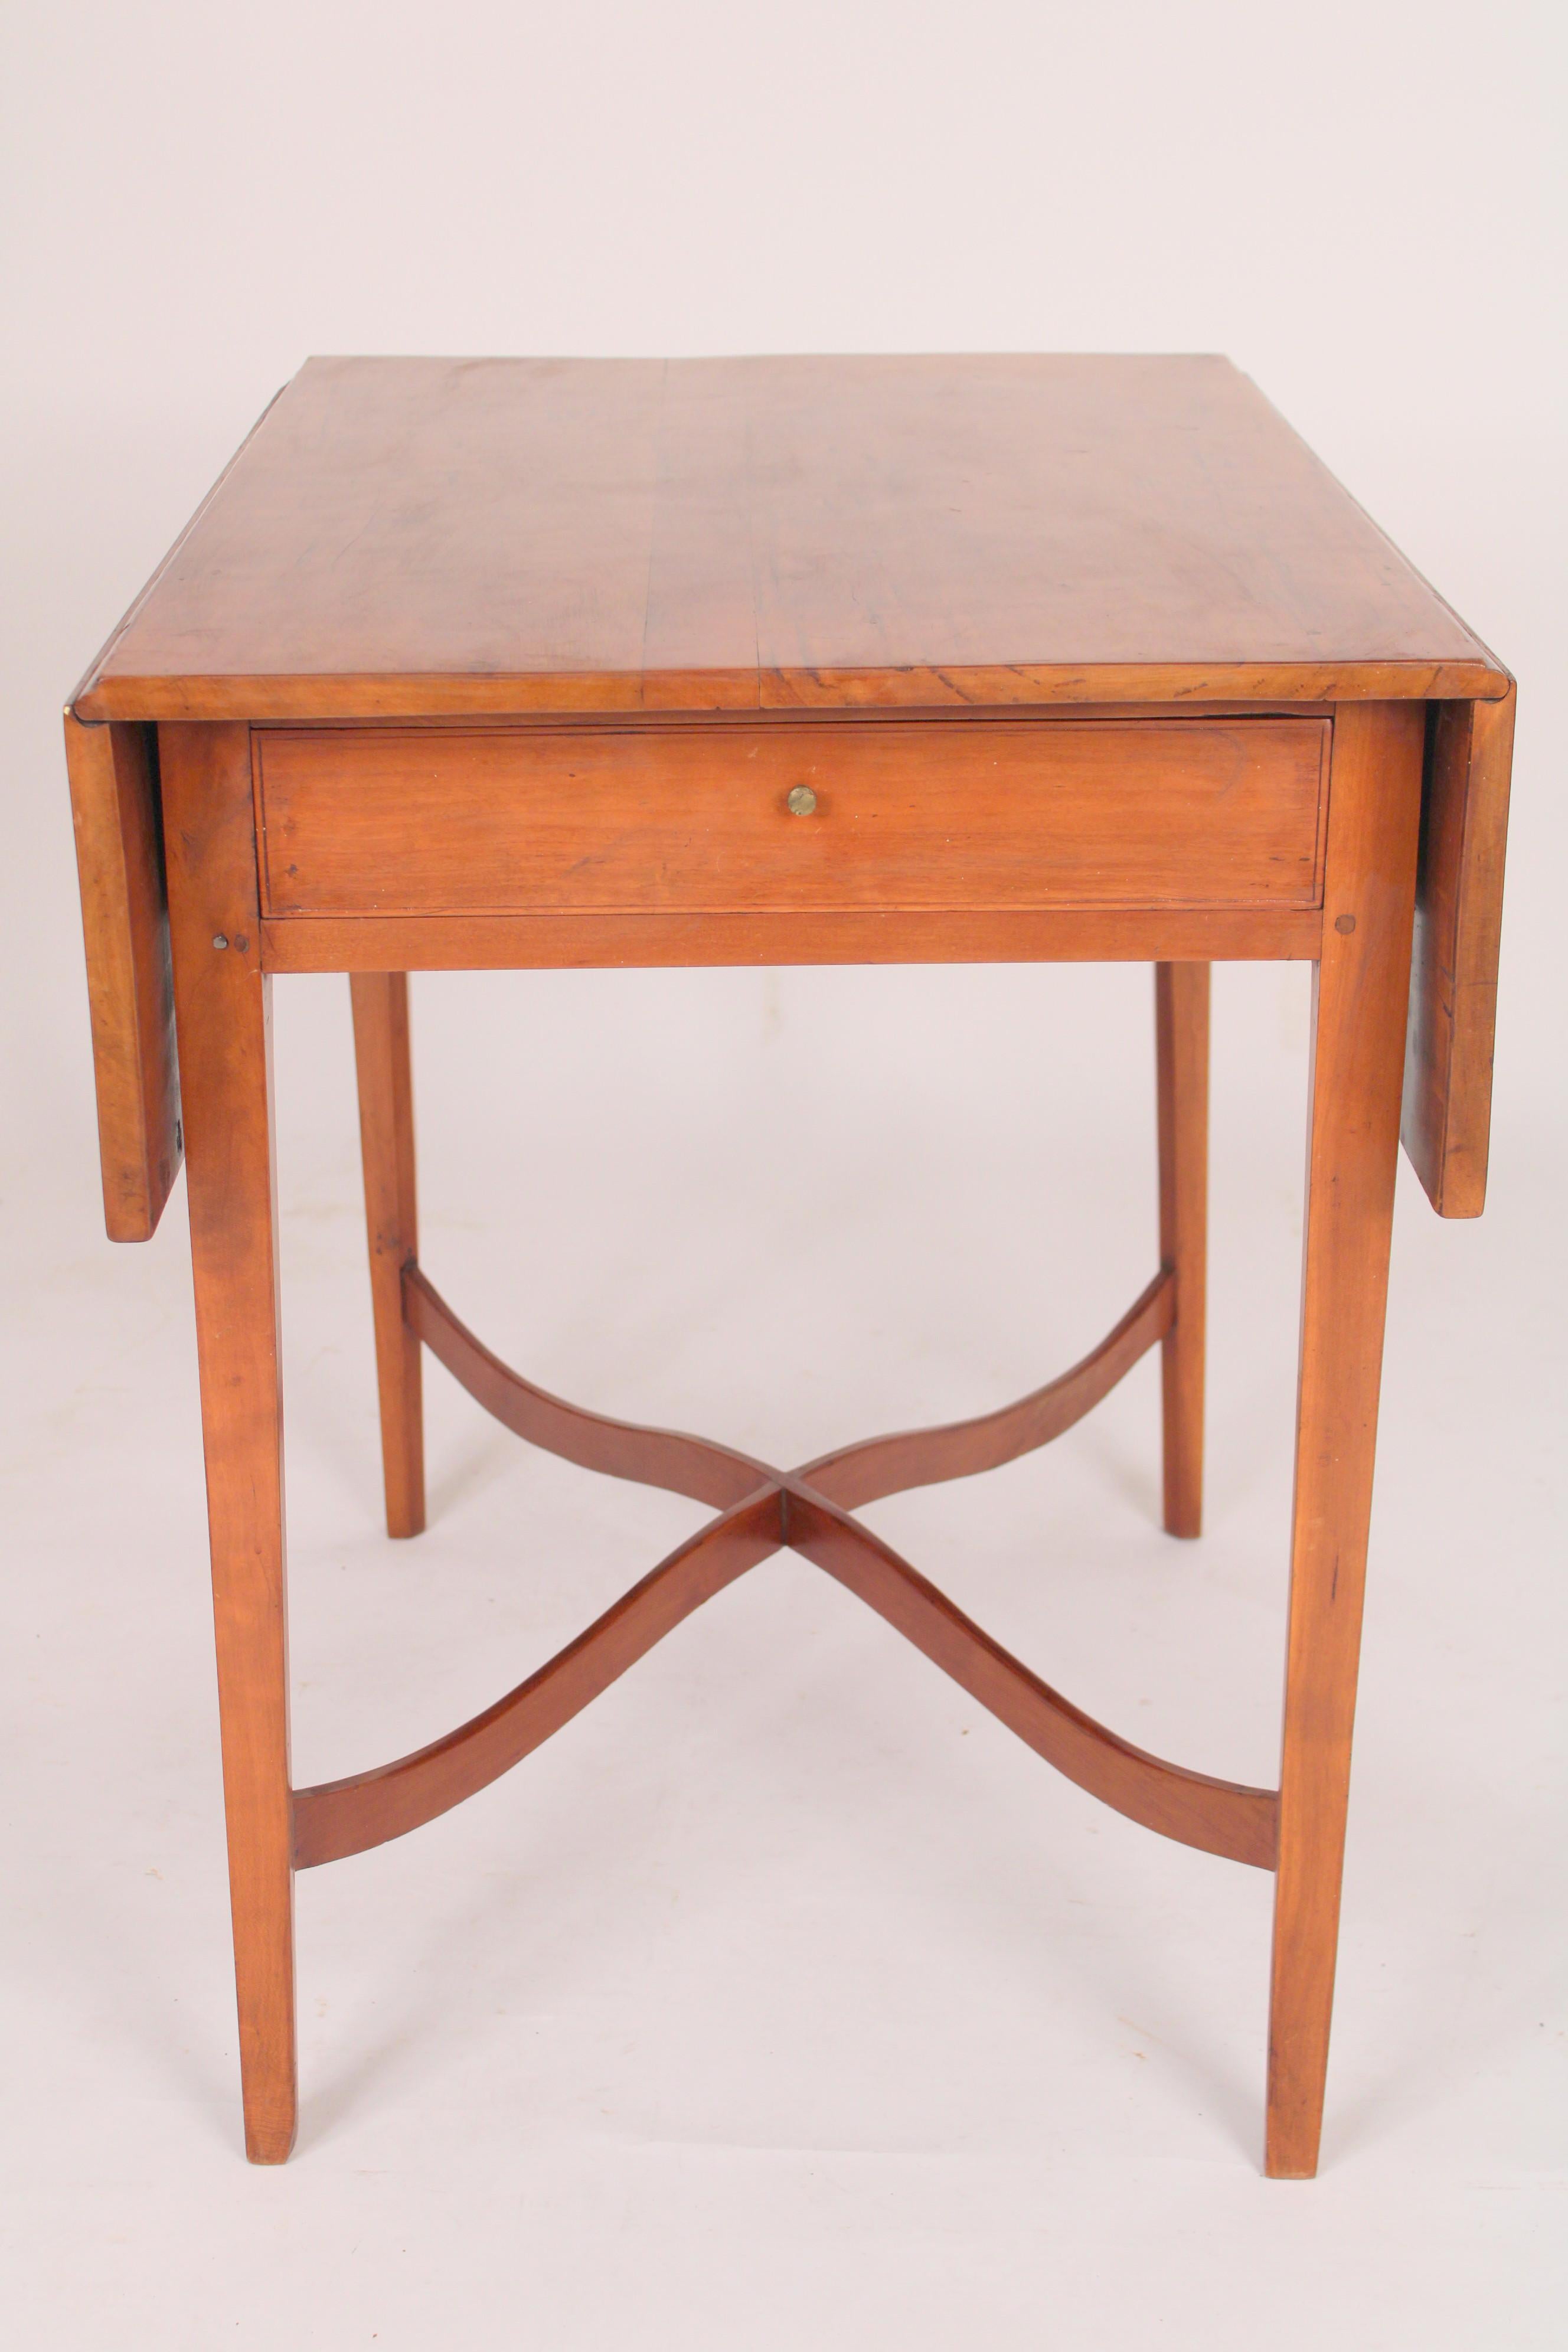 Antique American federal style cherry wood drop leaf table, 19th century. With a 2 board top, a frieze drawer, square tapered legs and S shaped stretcher bars. Nice old cherry wood color and hand dove tailed drawer construction . Dimensions of top